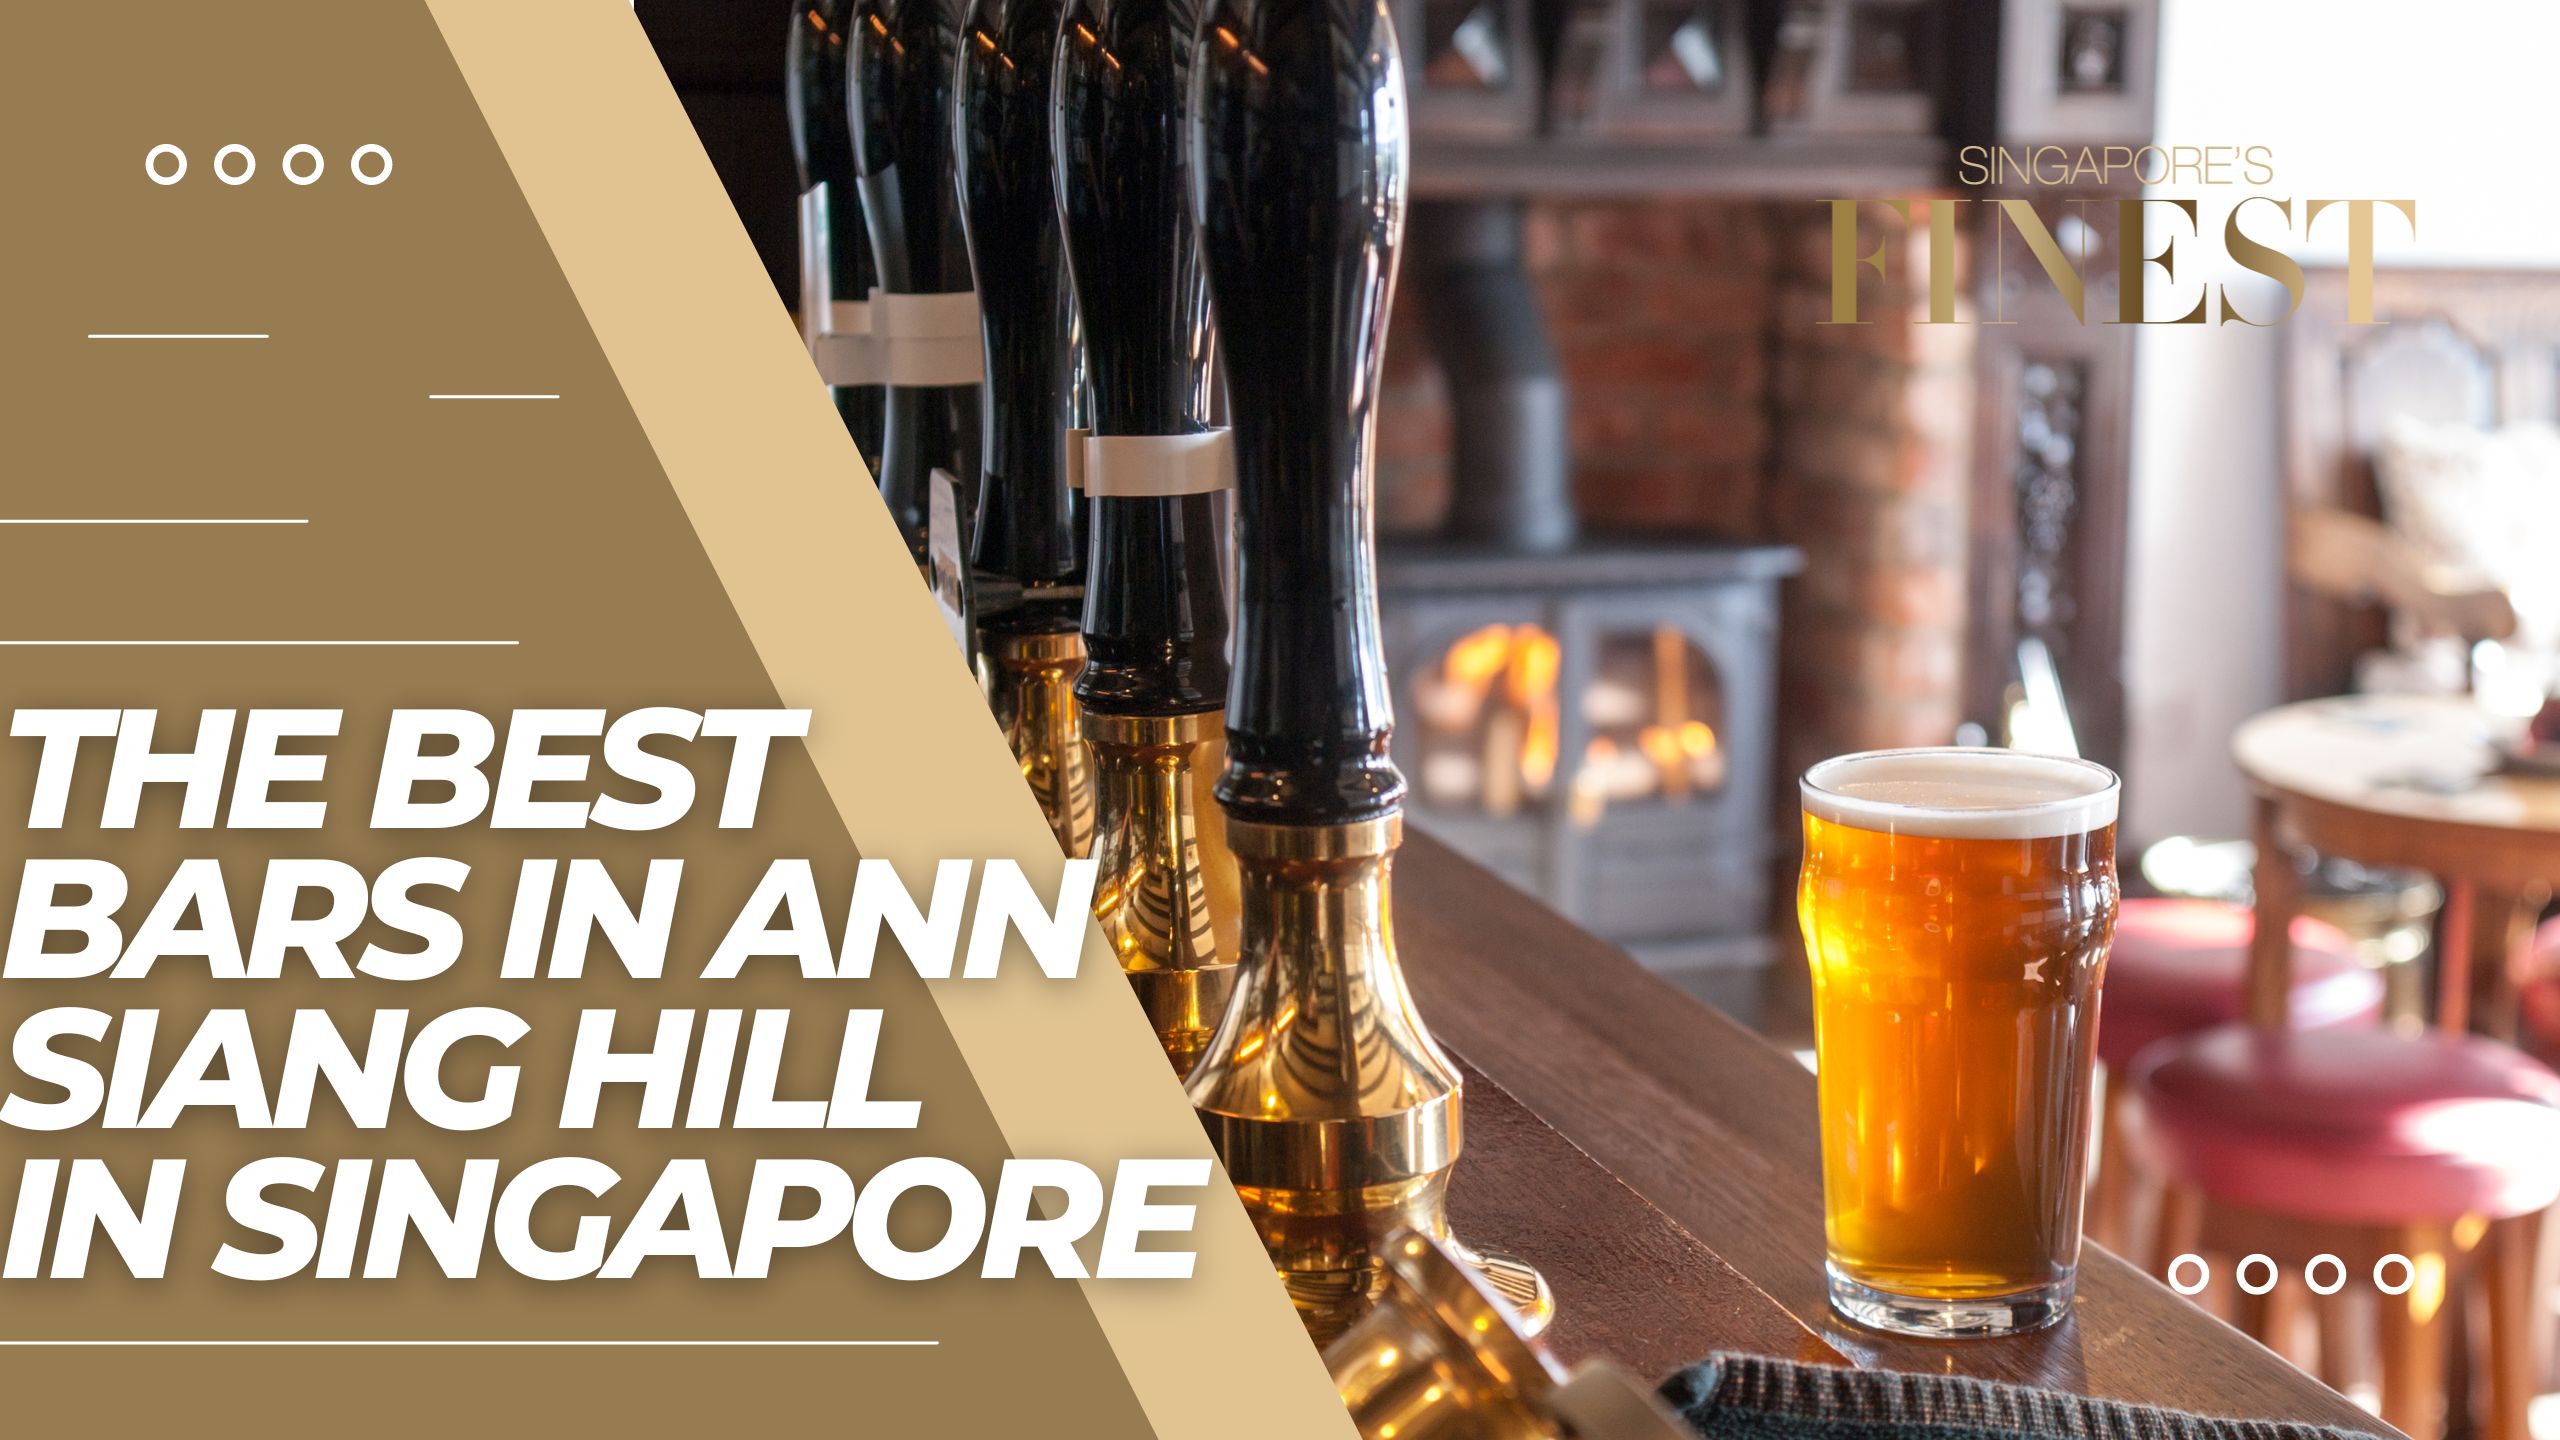 The Finest Bars in Ann Siang Hill in Singapore